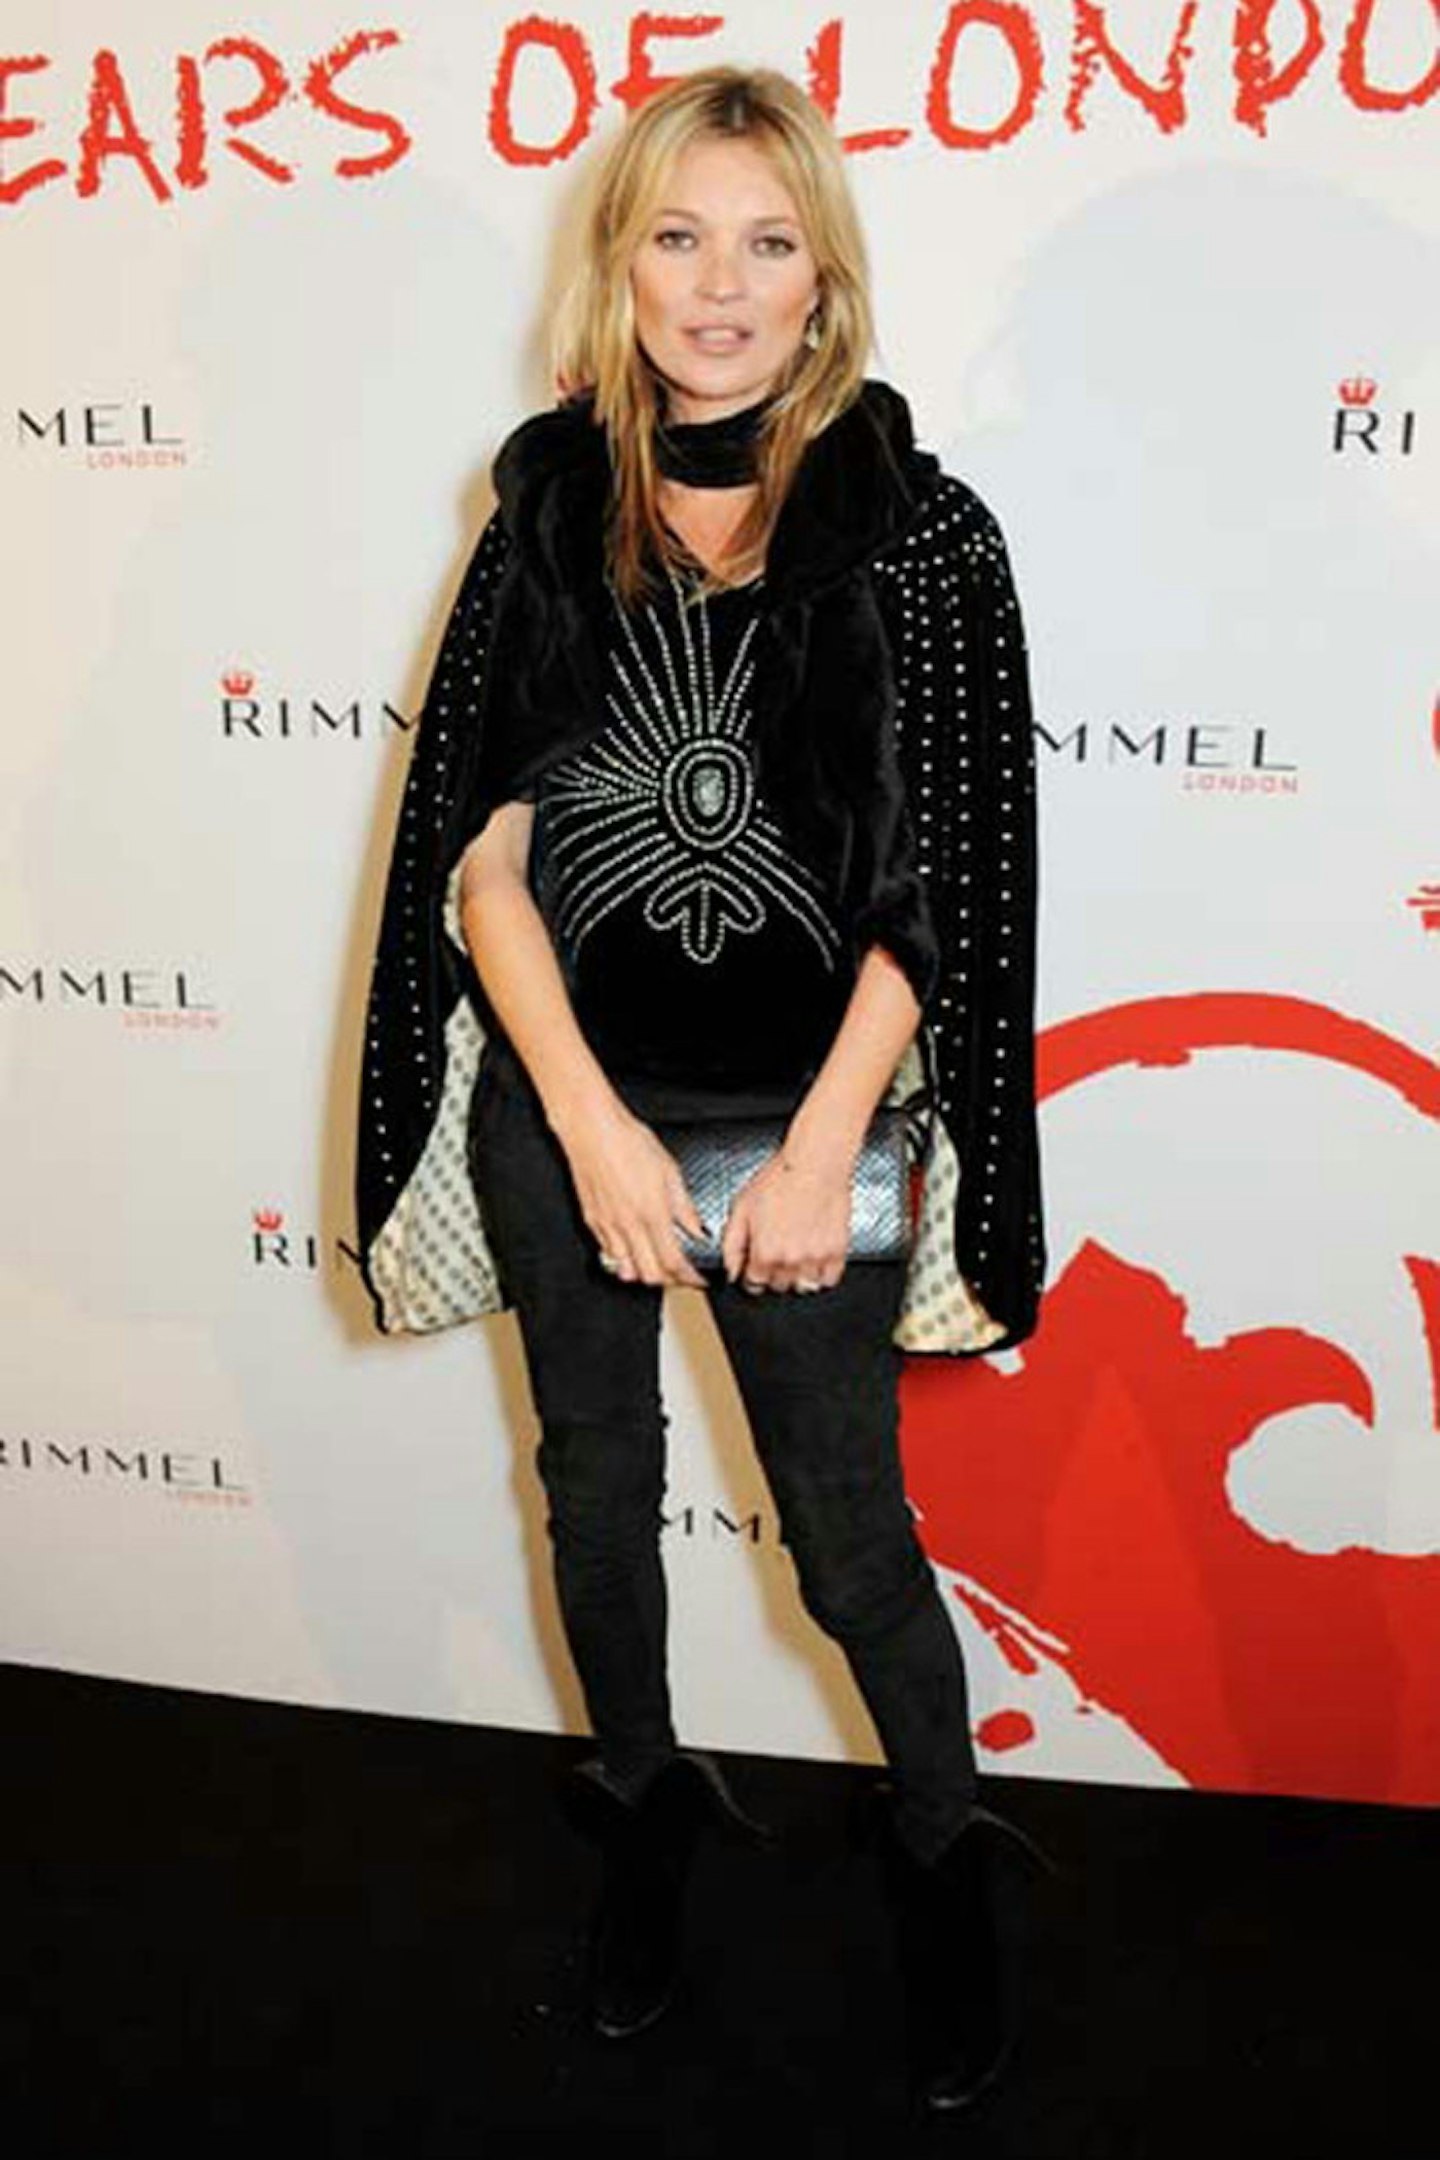 Kate Moss at Rimmel 180 Party, 10 October 2013